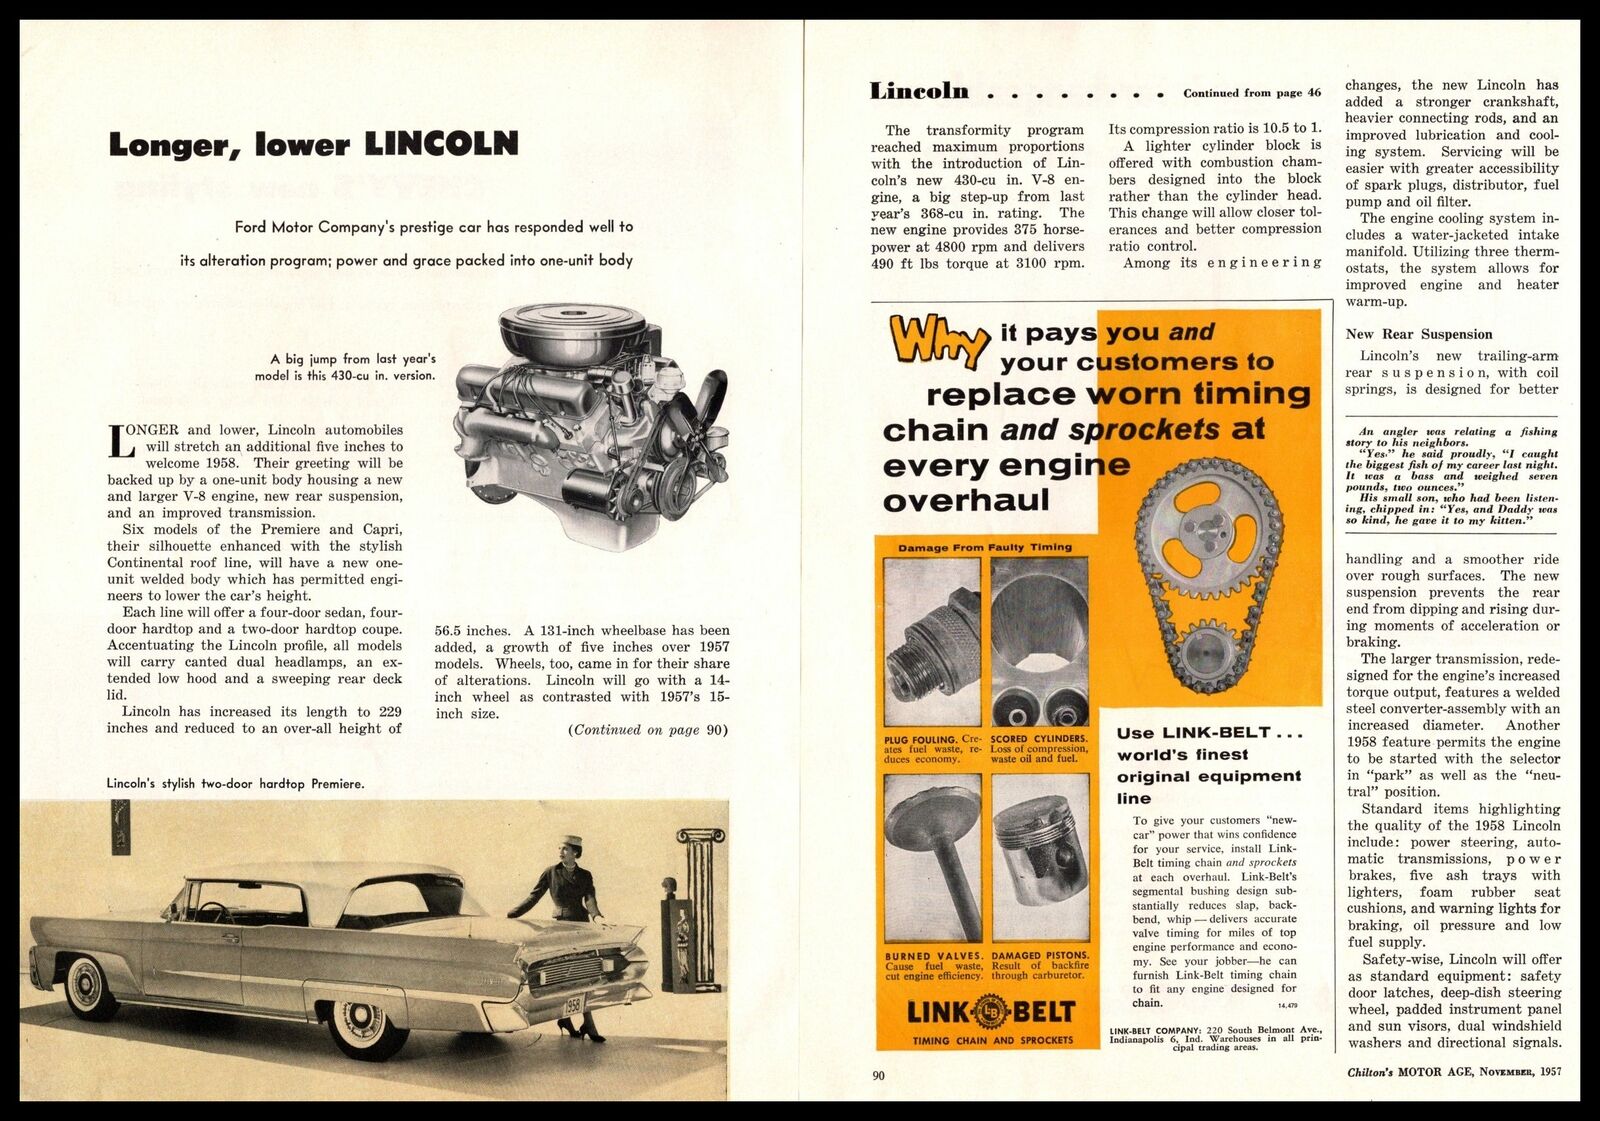 1958 Lincoln Premiere 2-door Hardtop 430 V8 Engine Photo 2-page Article Print Ad